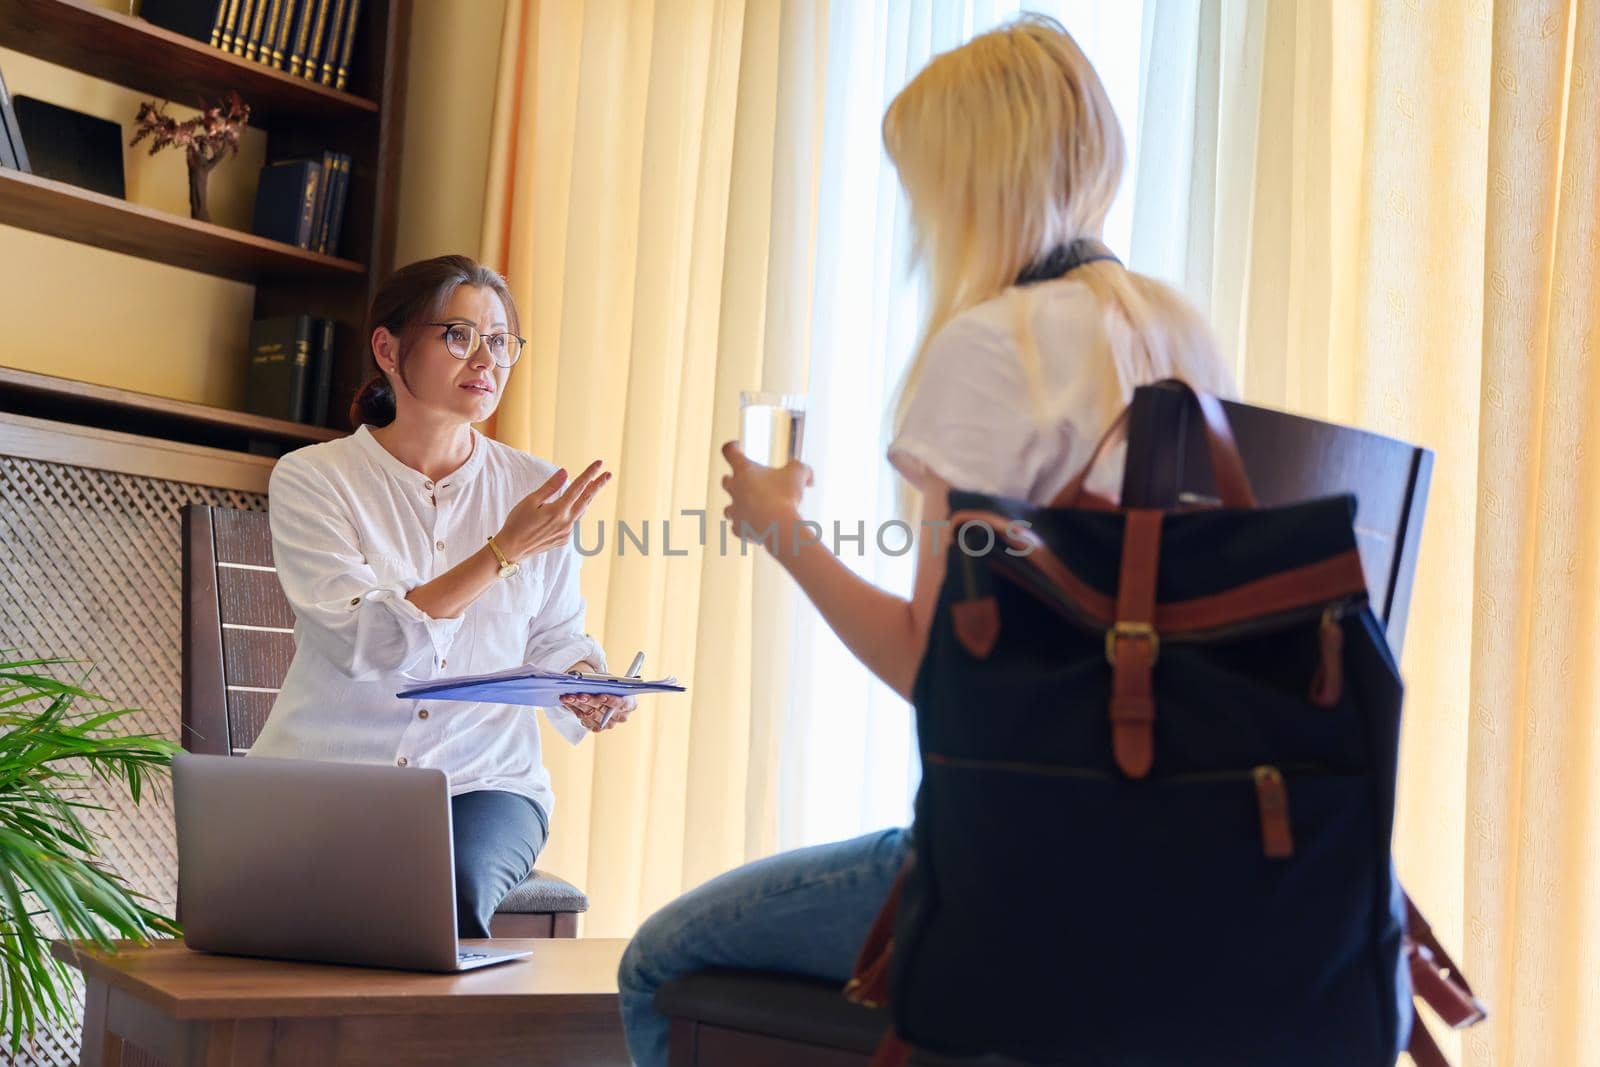 Session of female psychologist and girl teenage student in doctor's office. Consultation, professional assistance of terapist counselor for children and adolescents. Psychology, therapy, psychotherapy